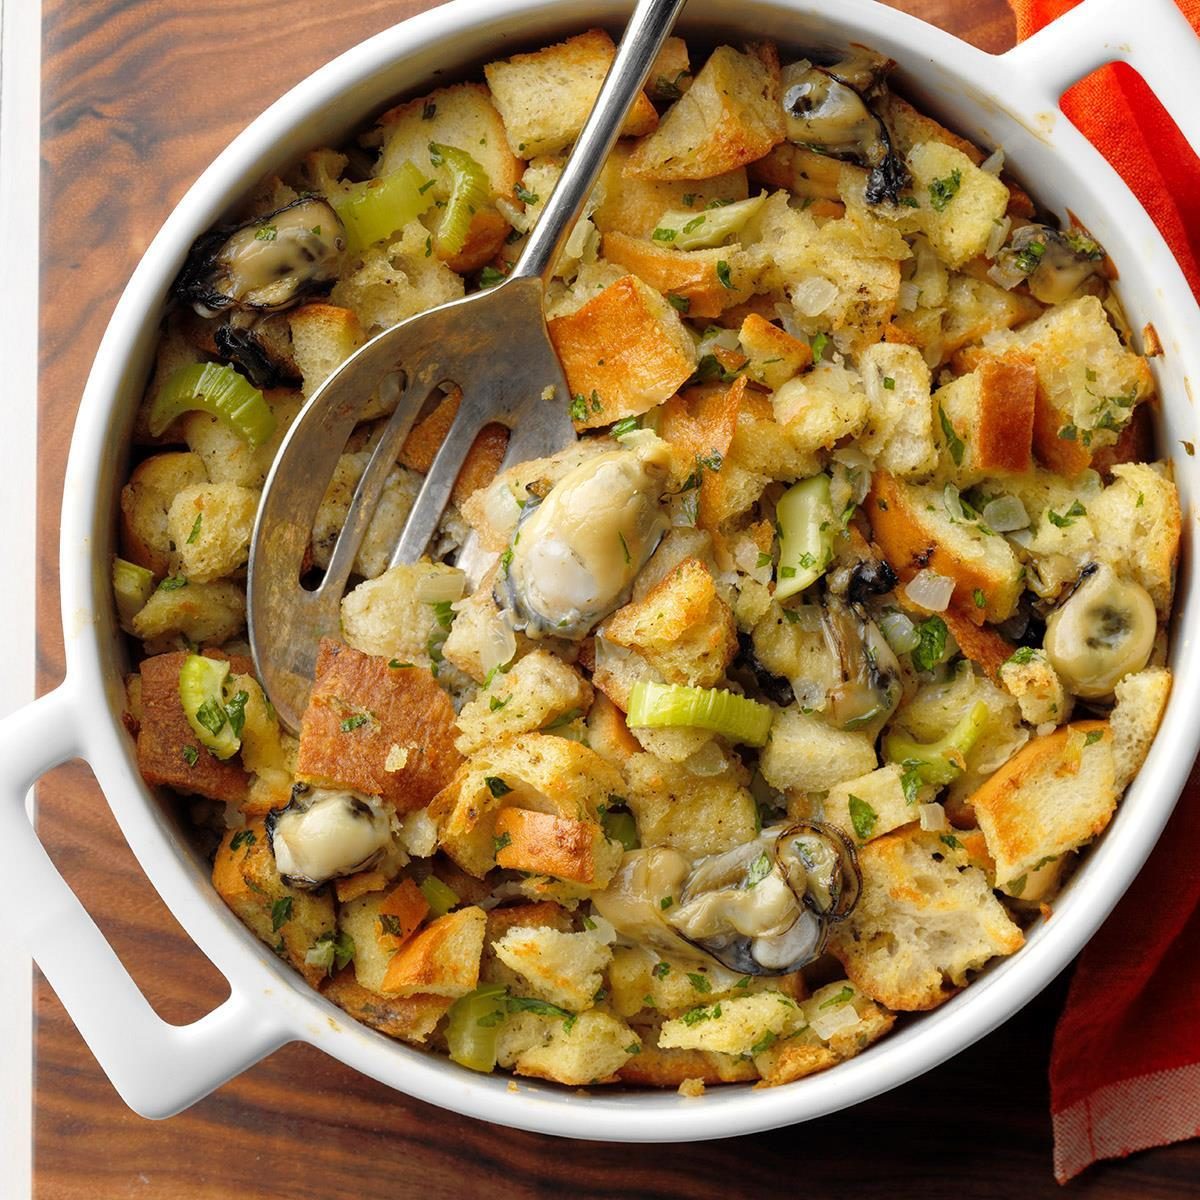 The 1940s: Oyster Stuffing